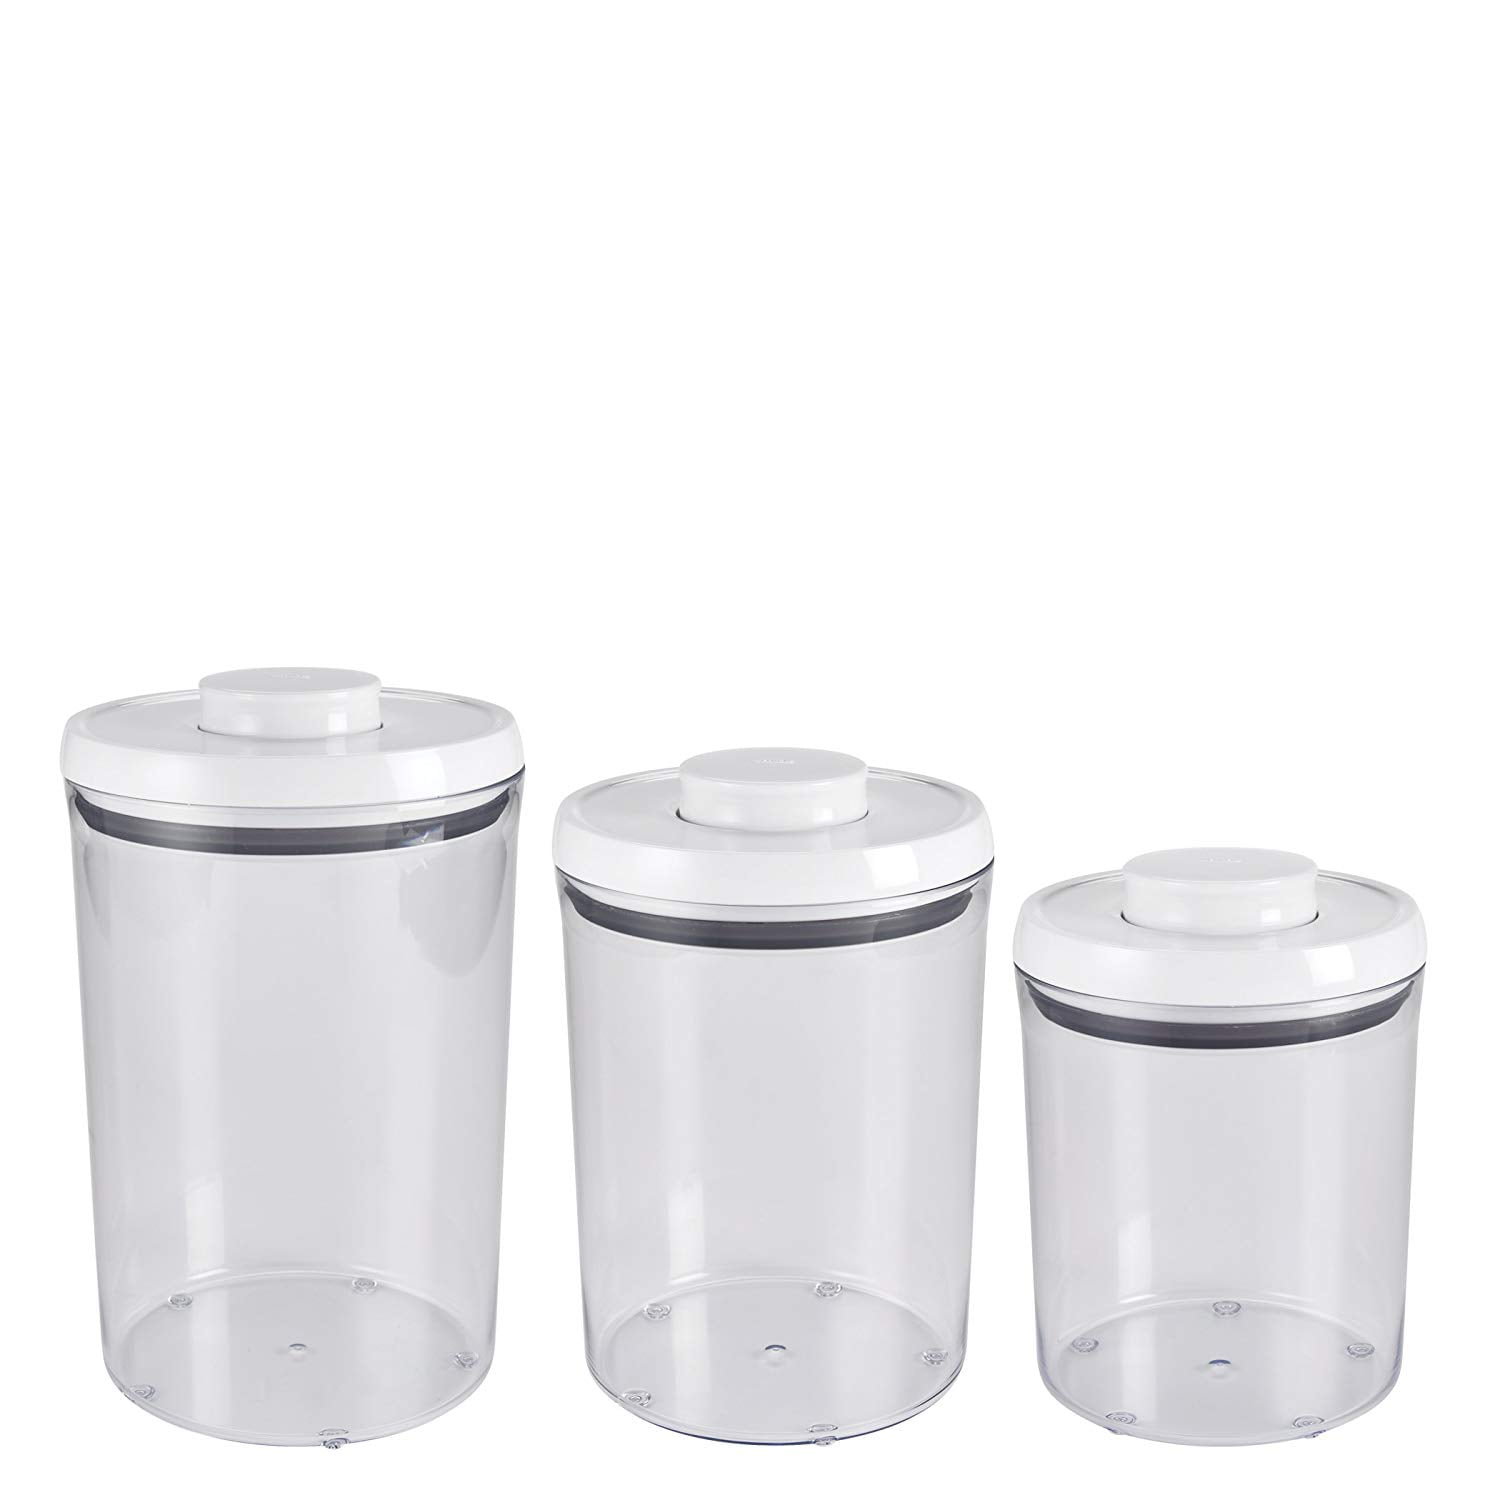 OXO Good Grips 6 Piece Large Canister Set with Scoops, 4.4 qt each, White &  Good Grips 3-PC Small Square Short POP Container Set